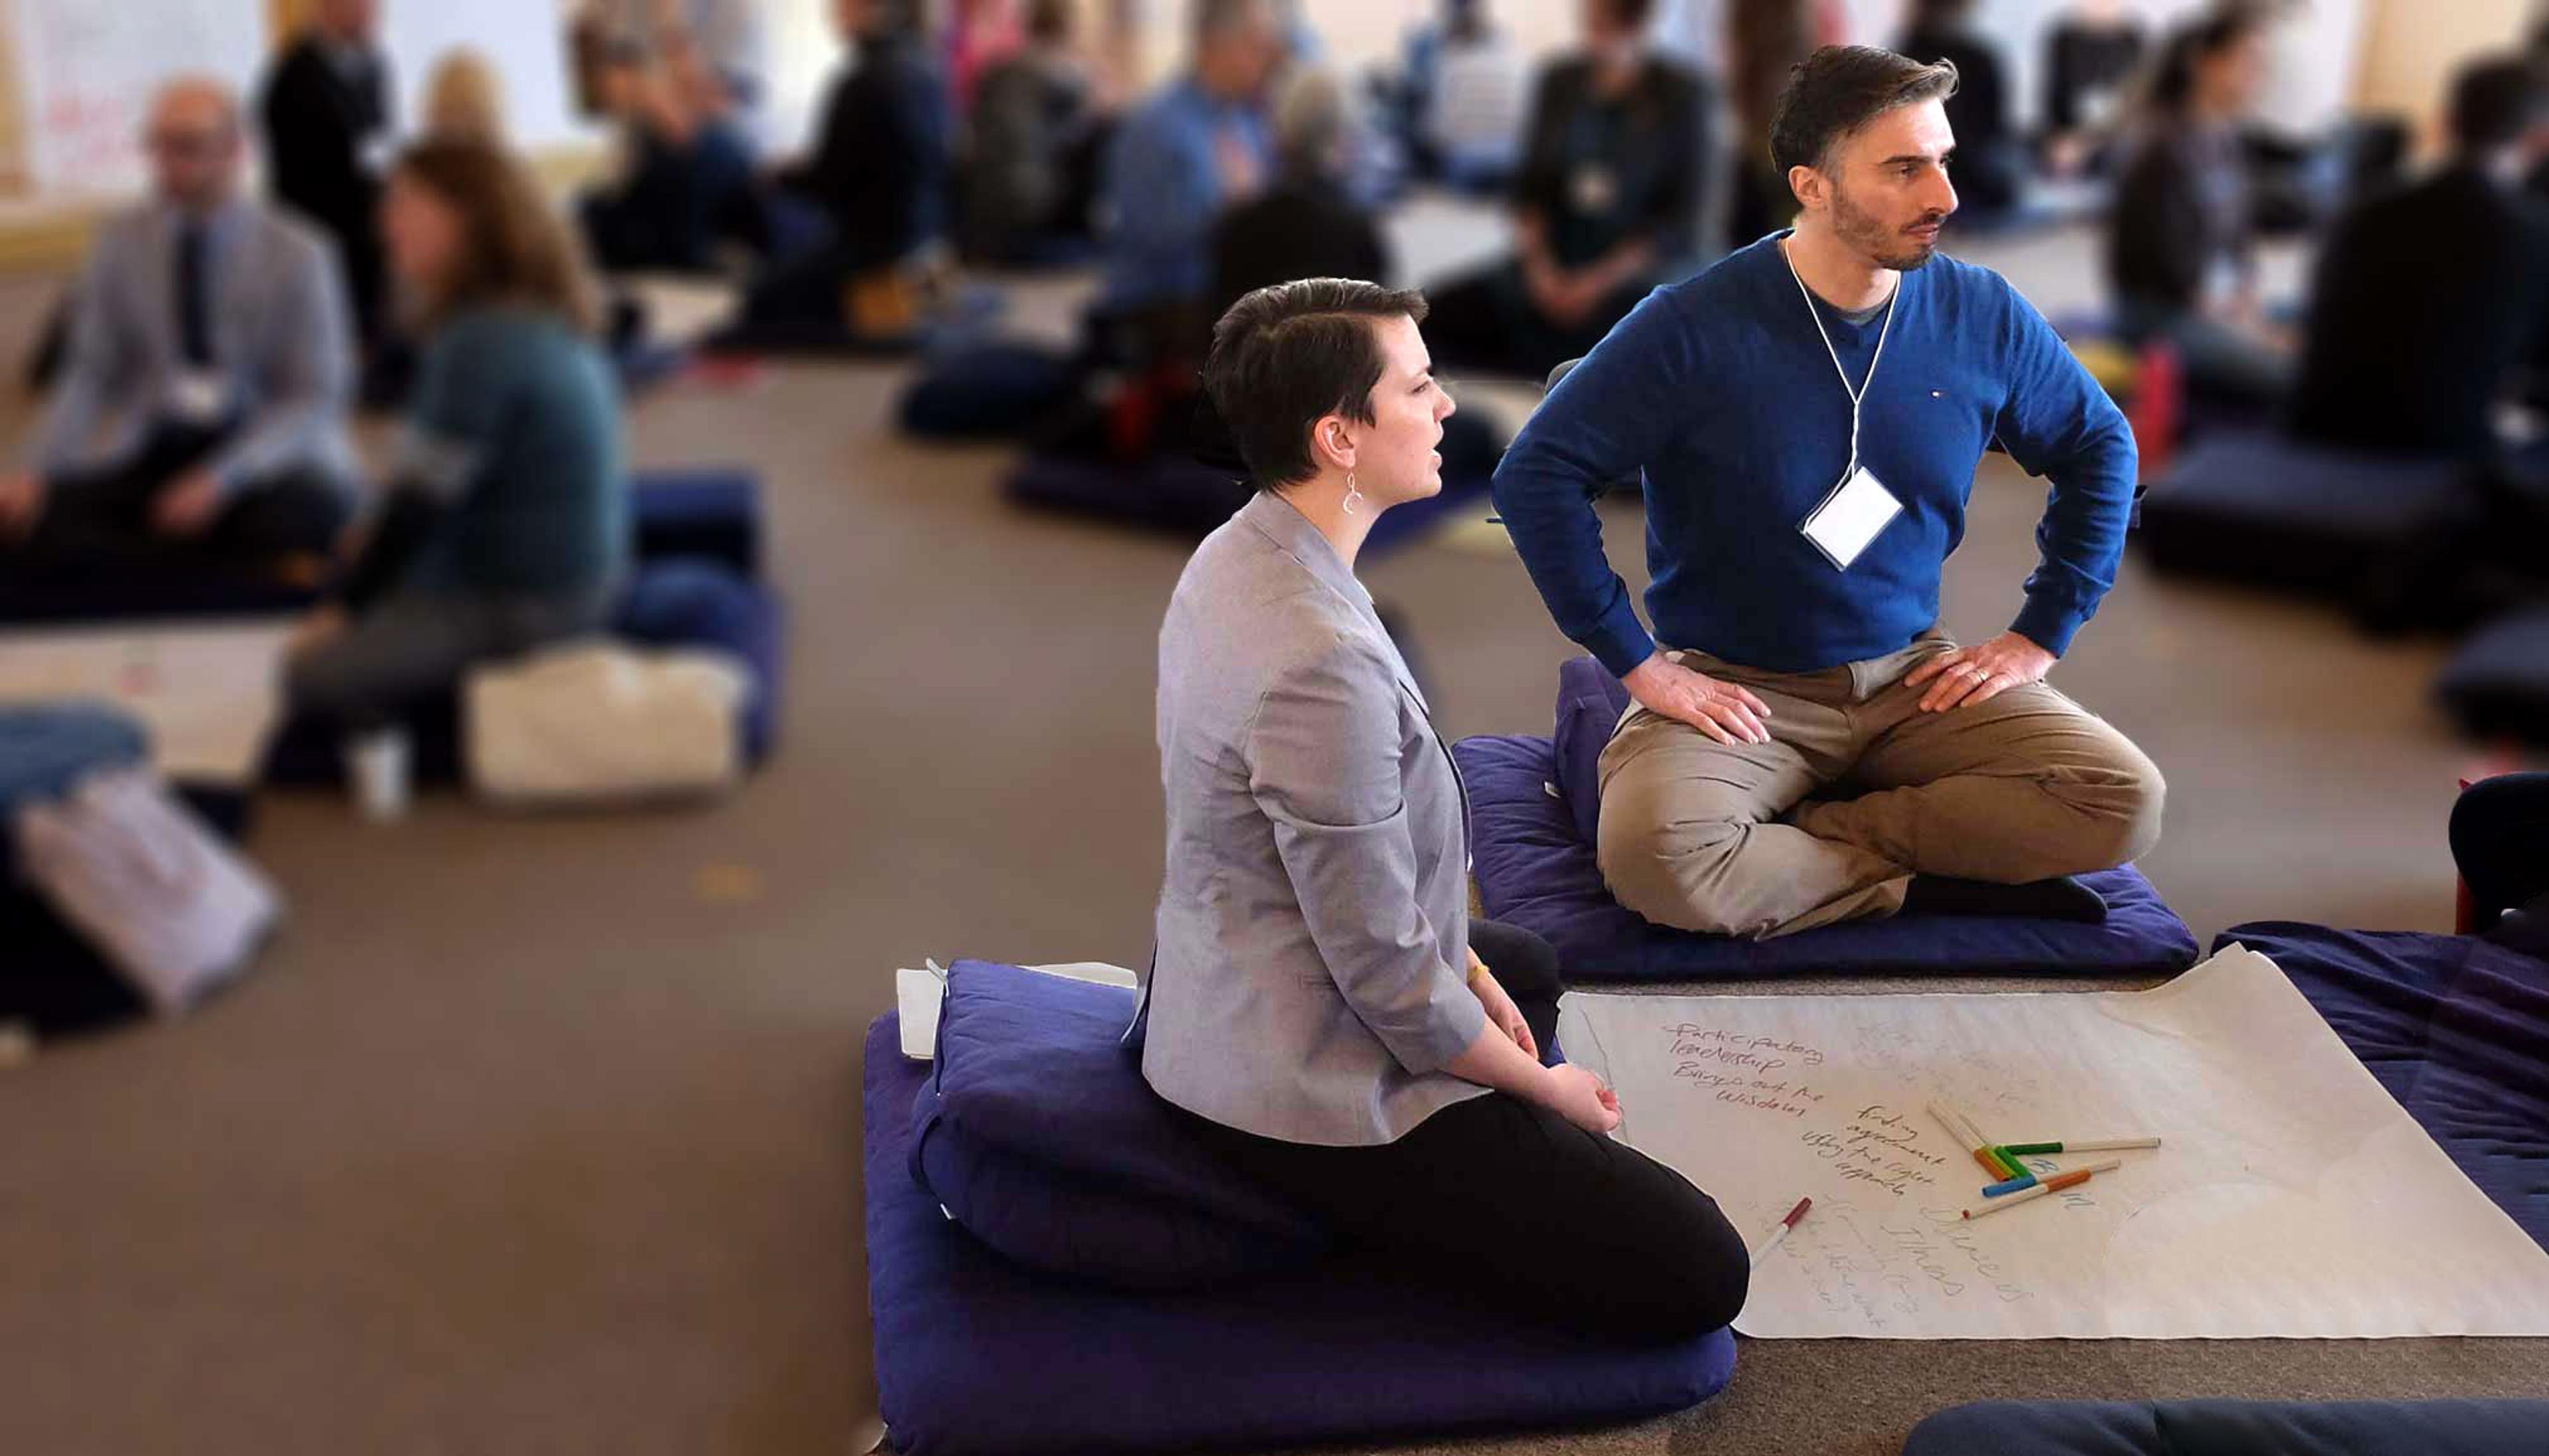 Mindful Leadership Training series at Karme Choling Meditation Retreat Center, in Vermont